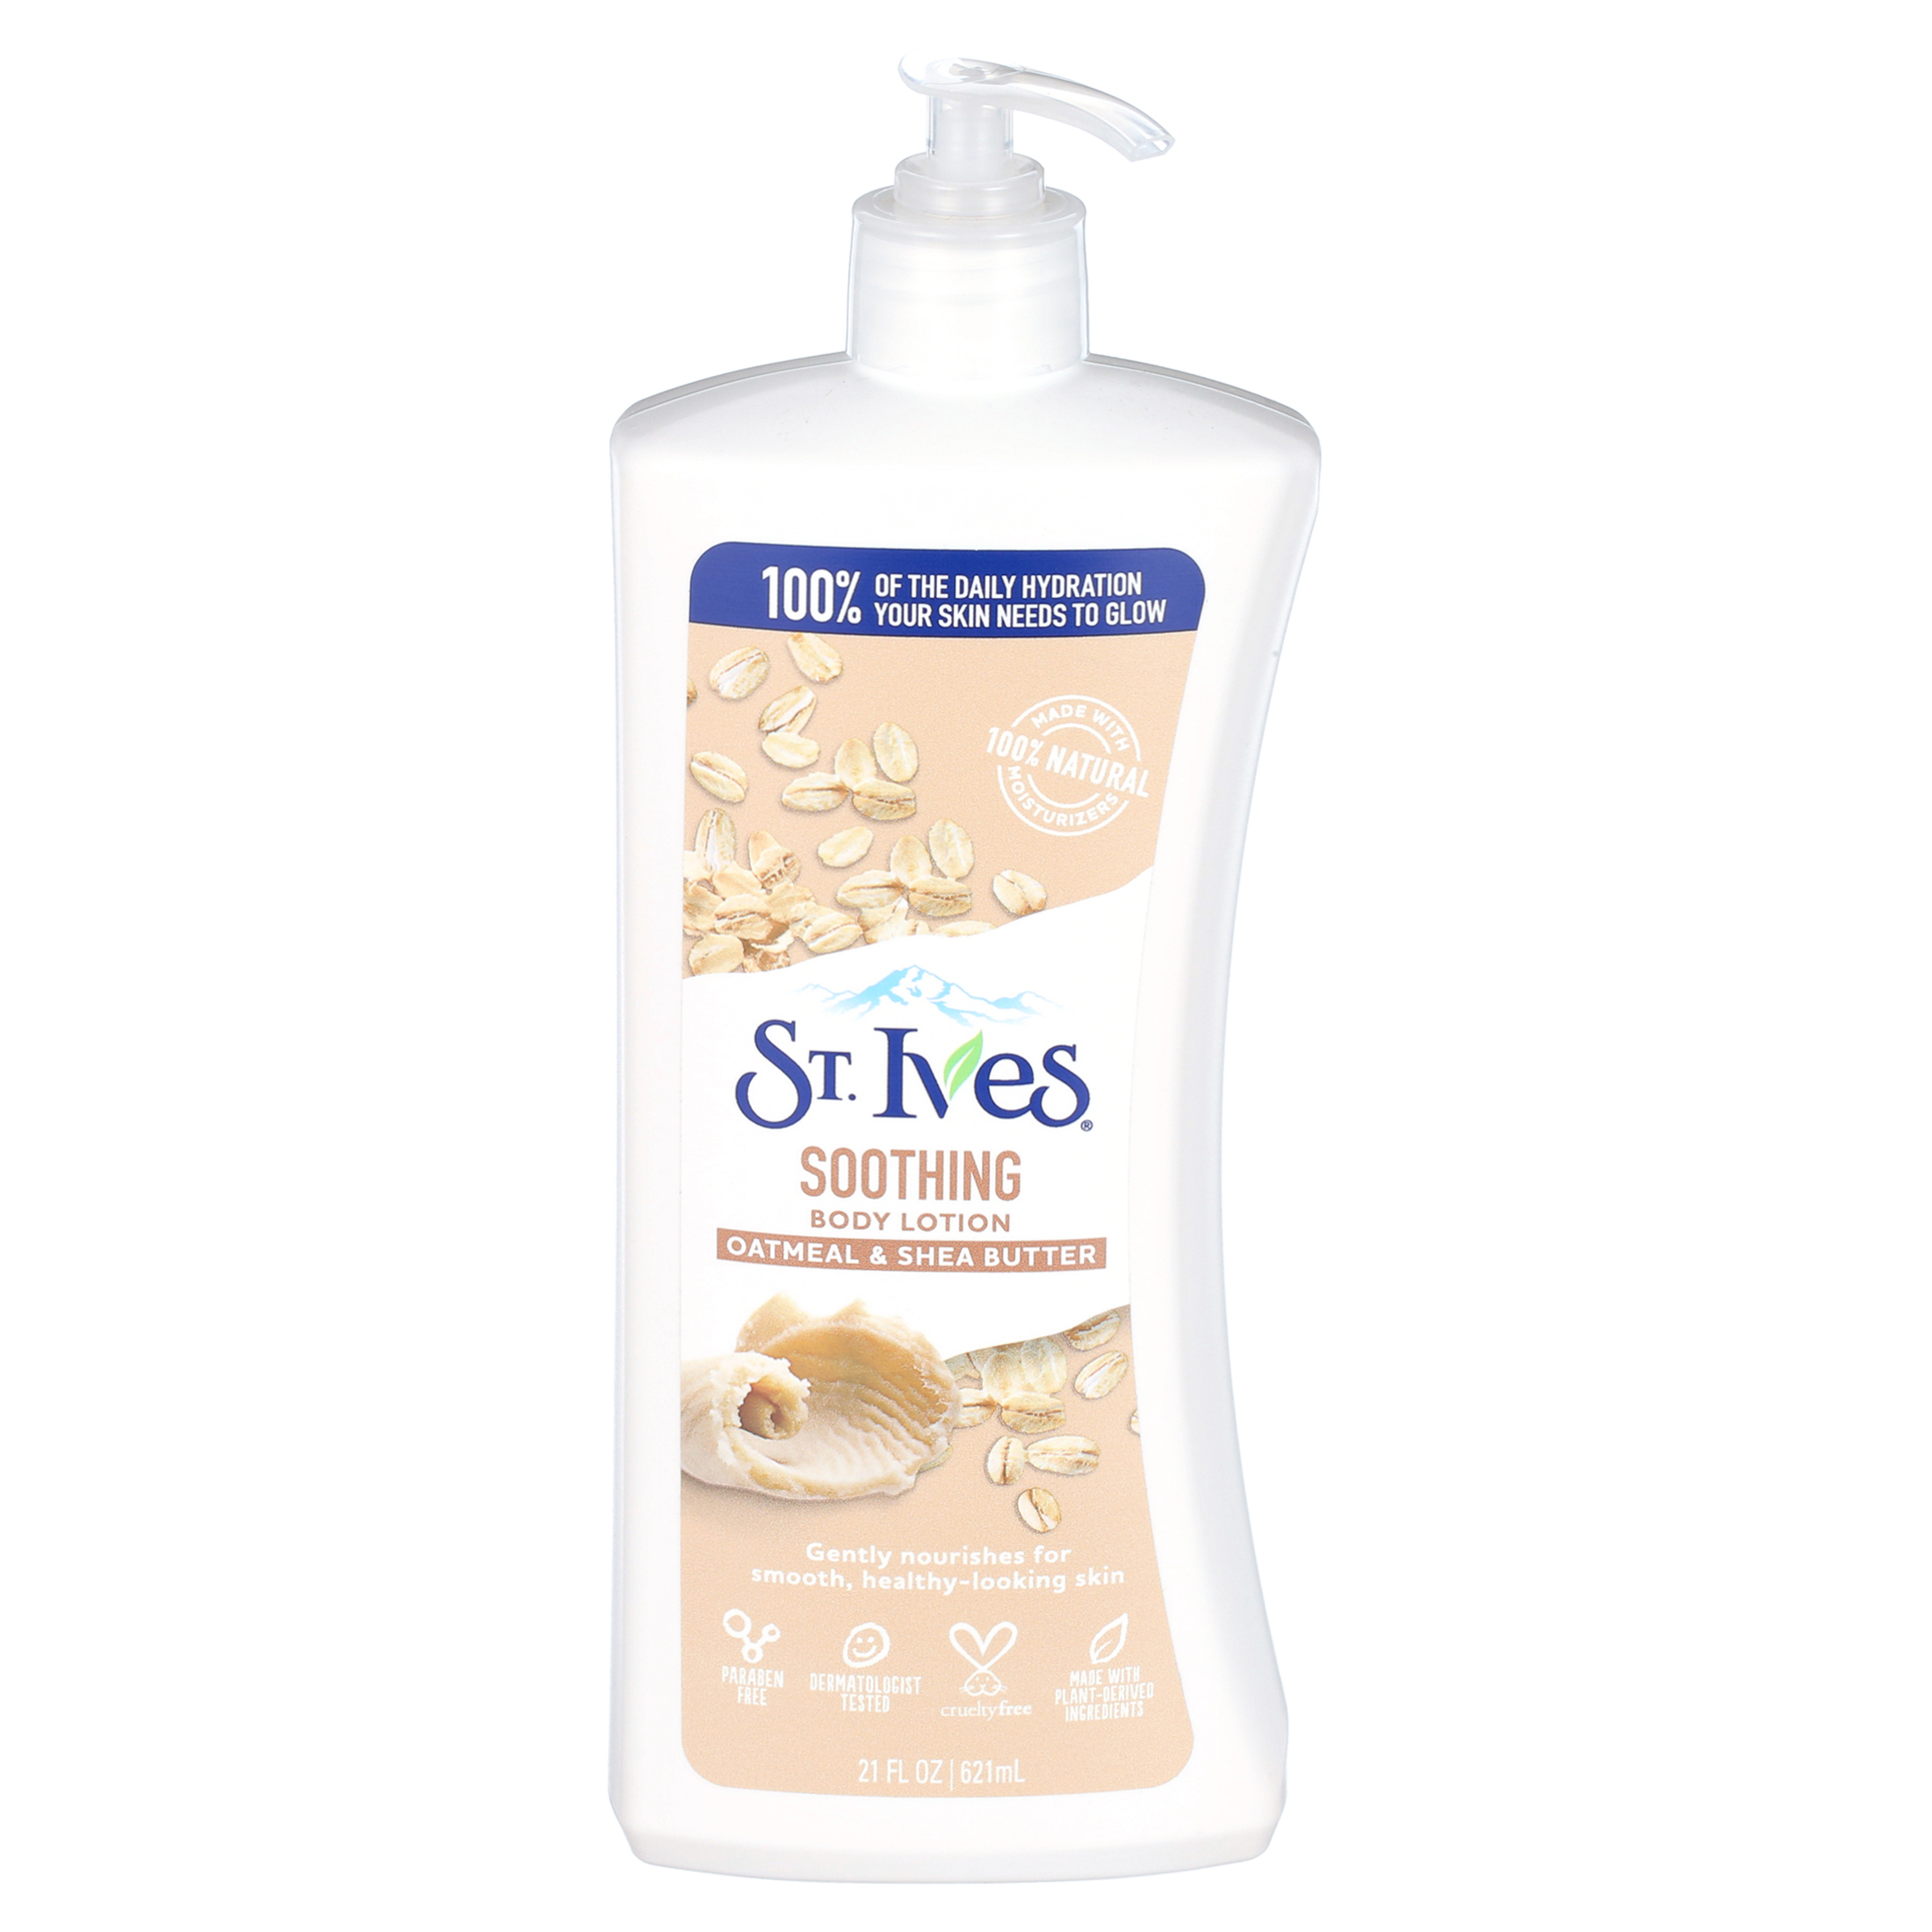 St. Ives Soothing Hand & Body Lotion Oatmeal & Shea Butter 21 fl oz - image 5 of 6